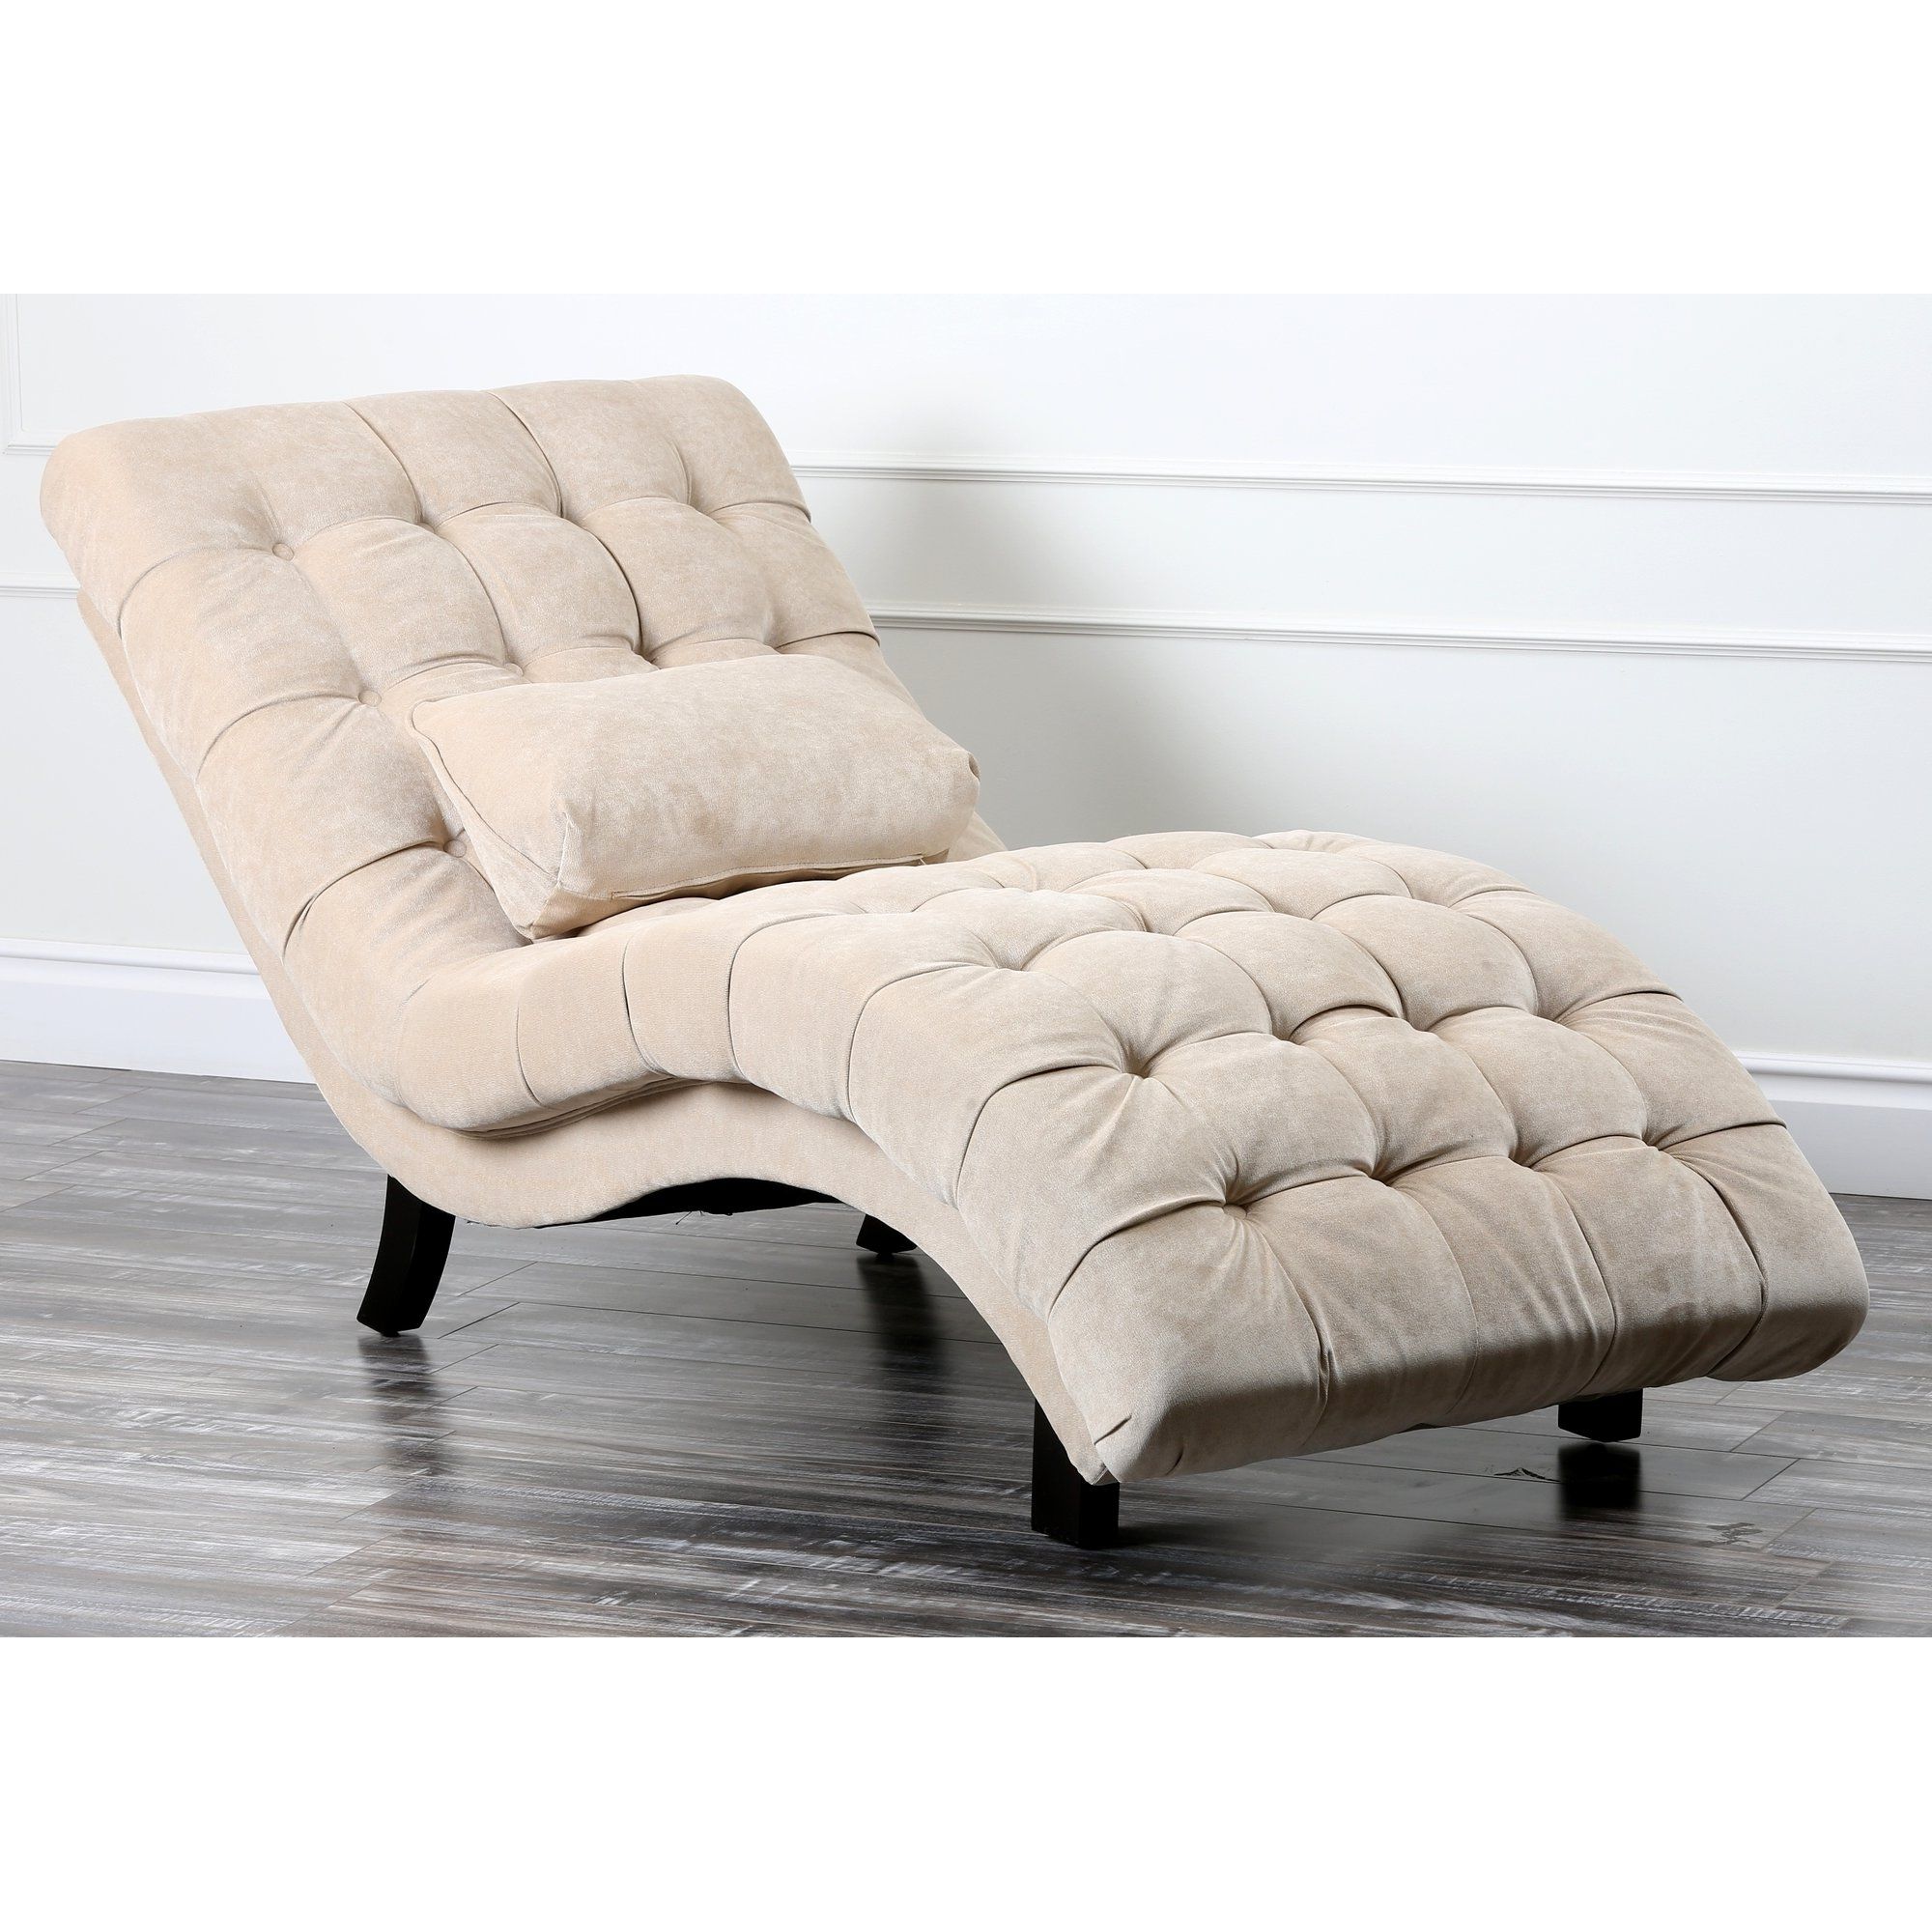 Chaise Lounge Chairs In Toronto Pertaining To Famous Chaise Lounge Chair Indoor • Lounge Chairs Ideas (View 2 of 15)